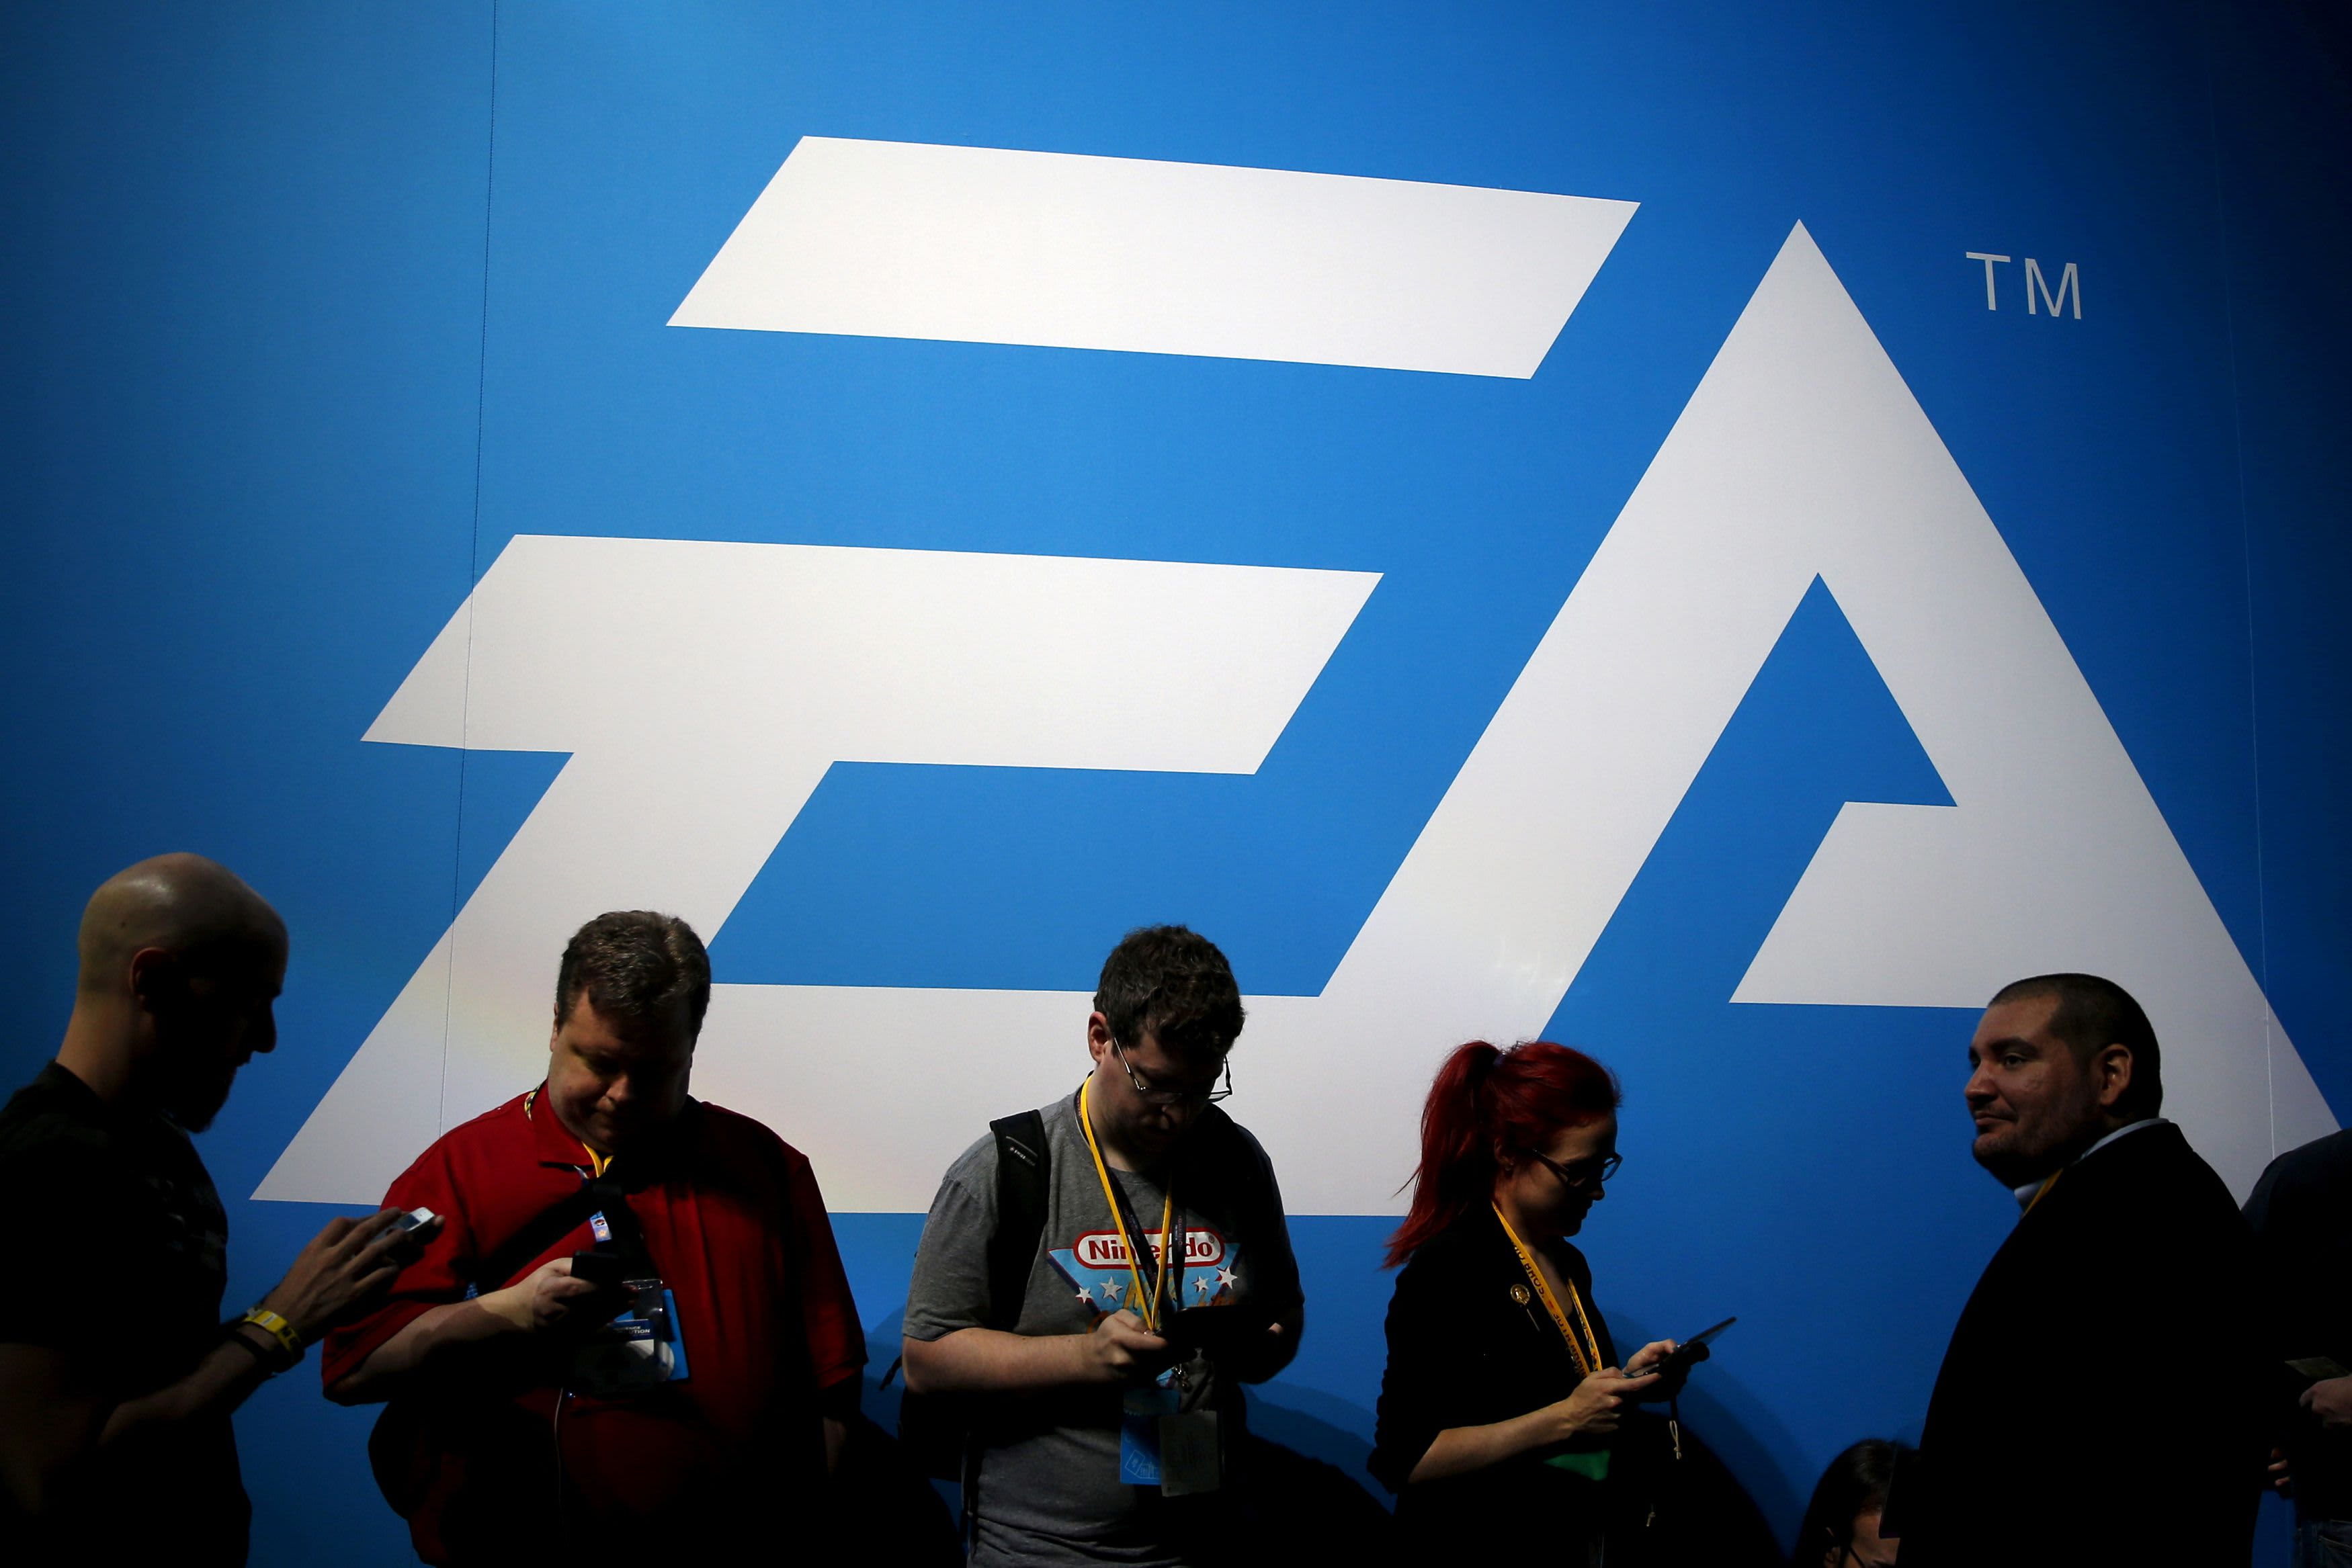 MKM downgrades Electronic Arts as video game pipeline slows down